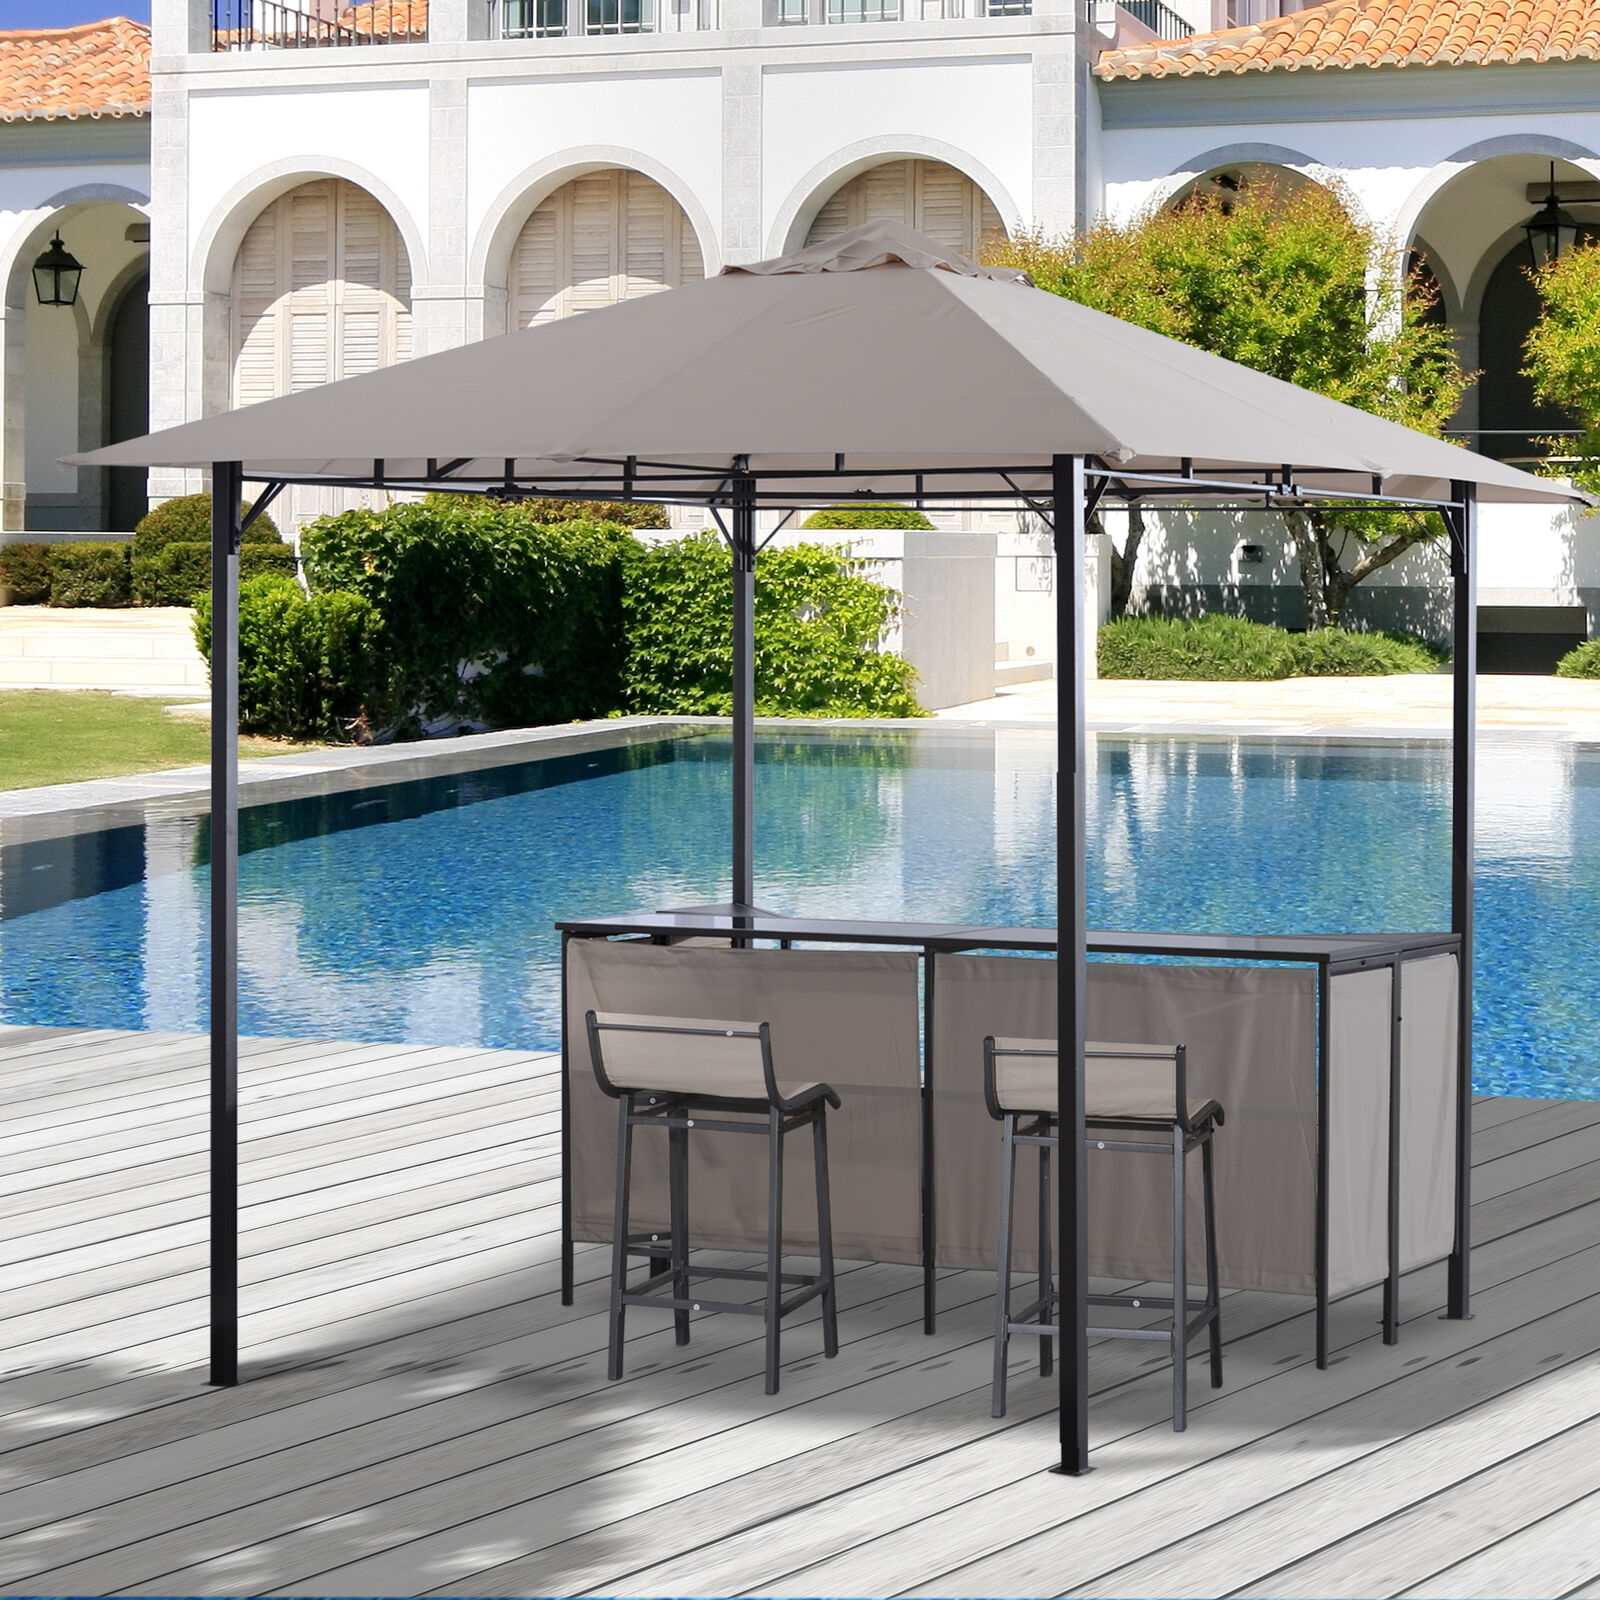 Outsunny 3PC Outdoor Patio Bar Table Set Chairs W/ Sunshade Canopy Backyard Furniture